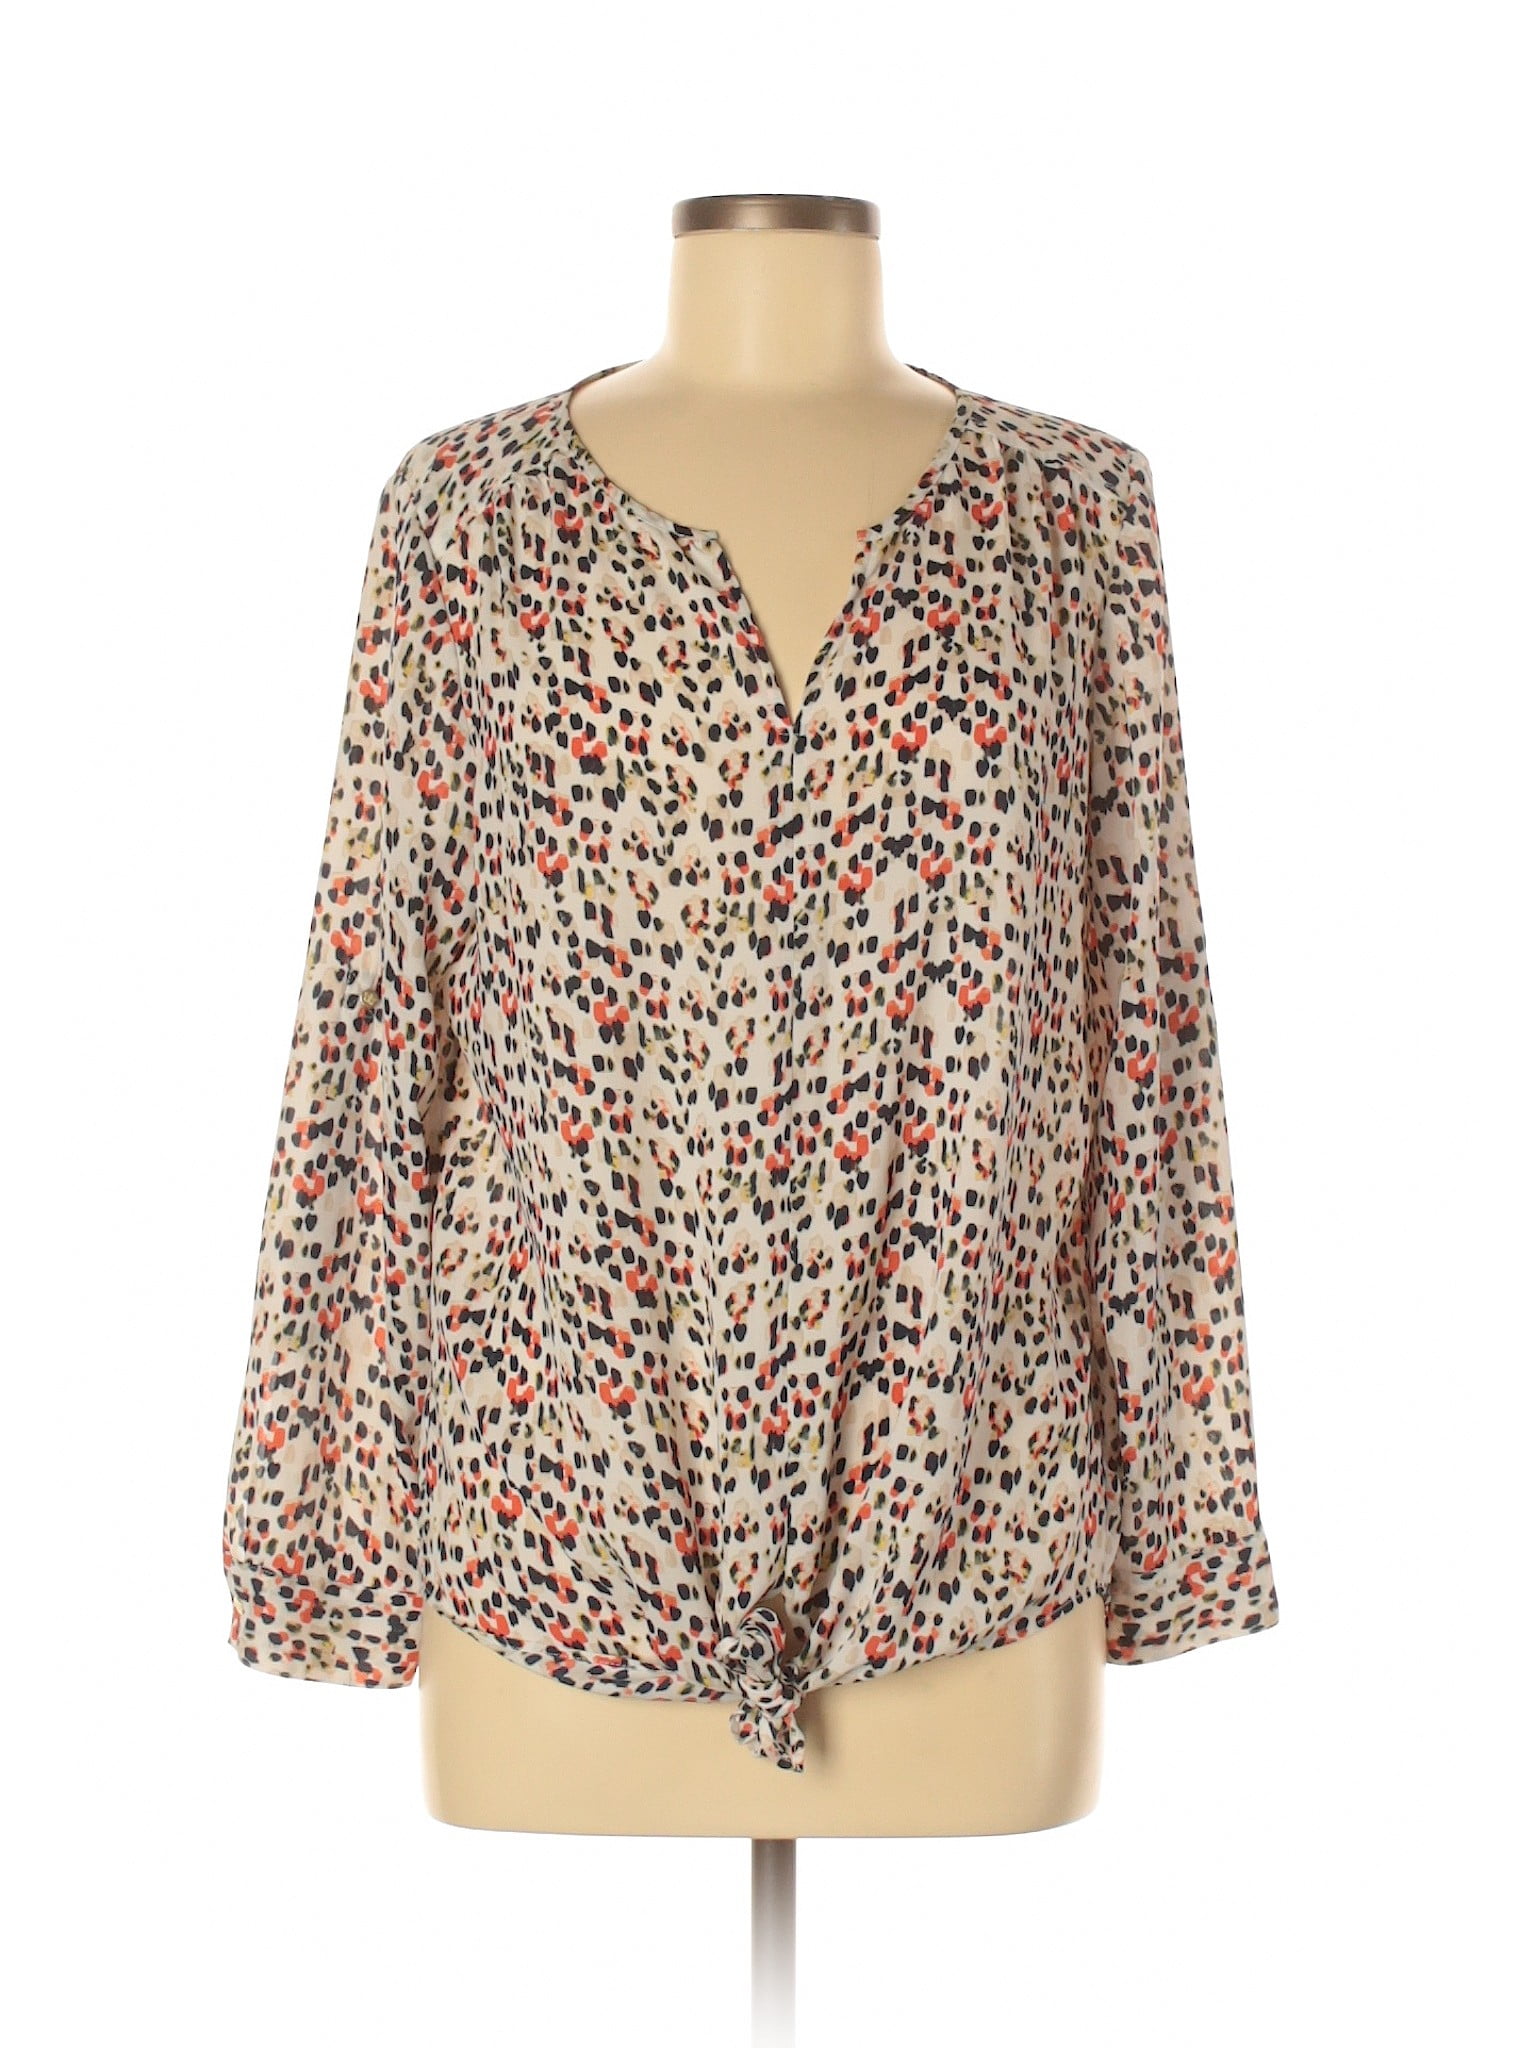 Chaus - Pre-Owned Chaus Women's Size M Long Sleeve Blouse - Walmart.com ...